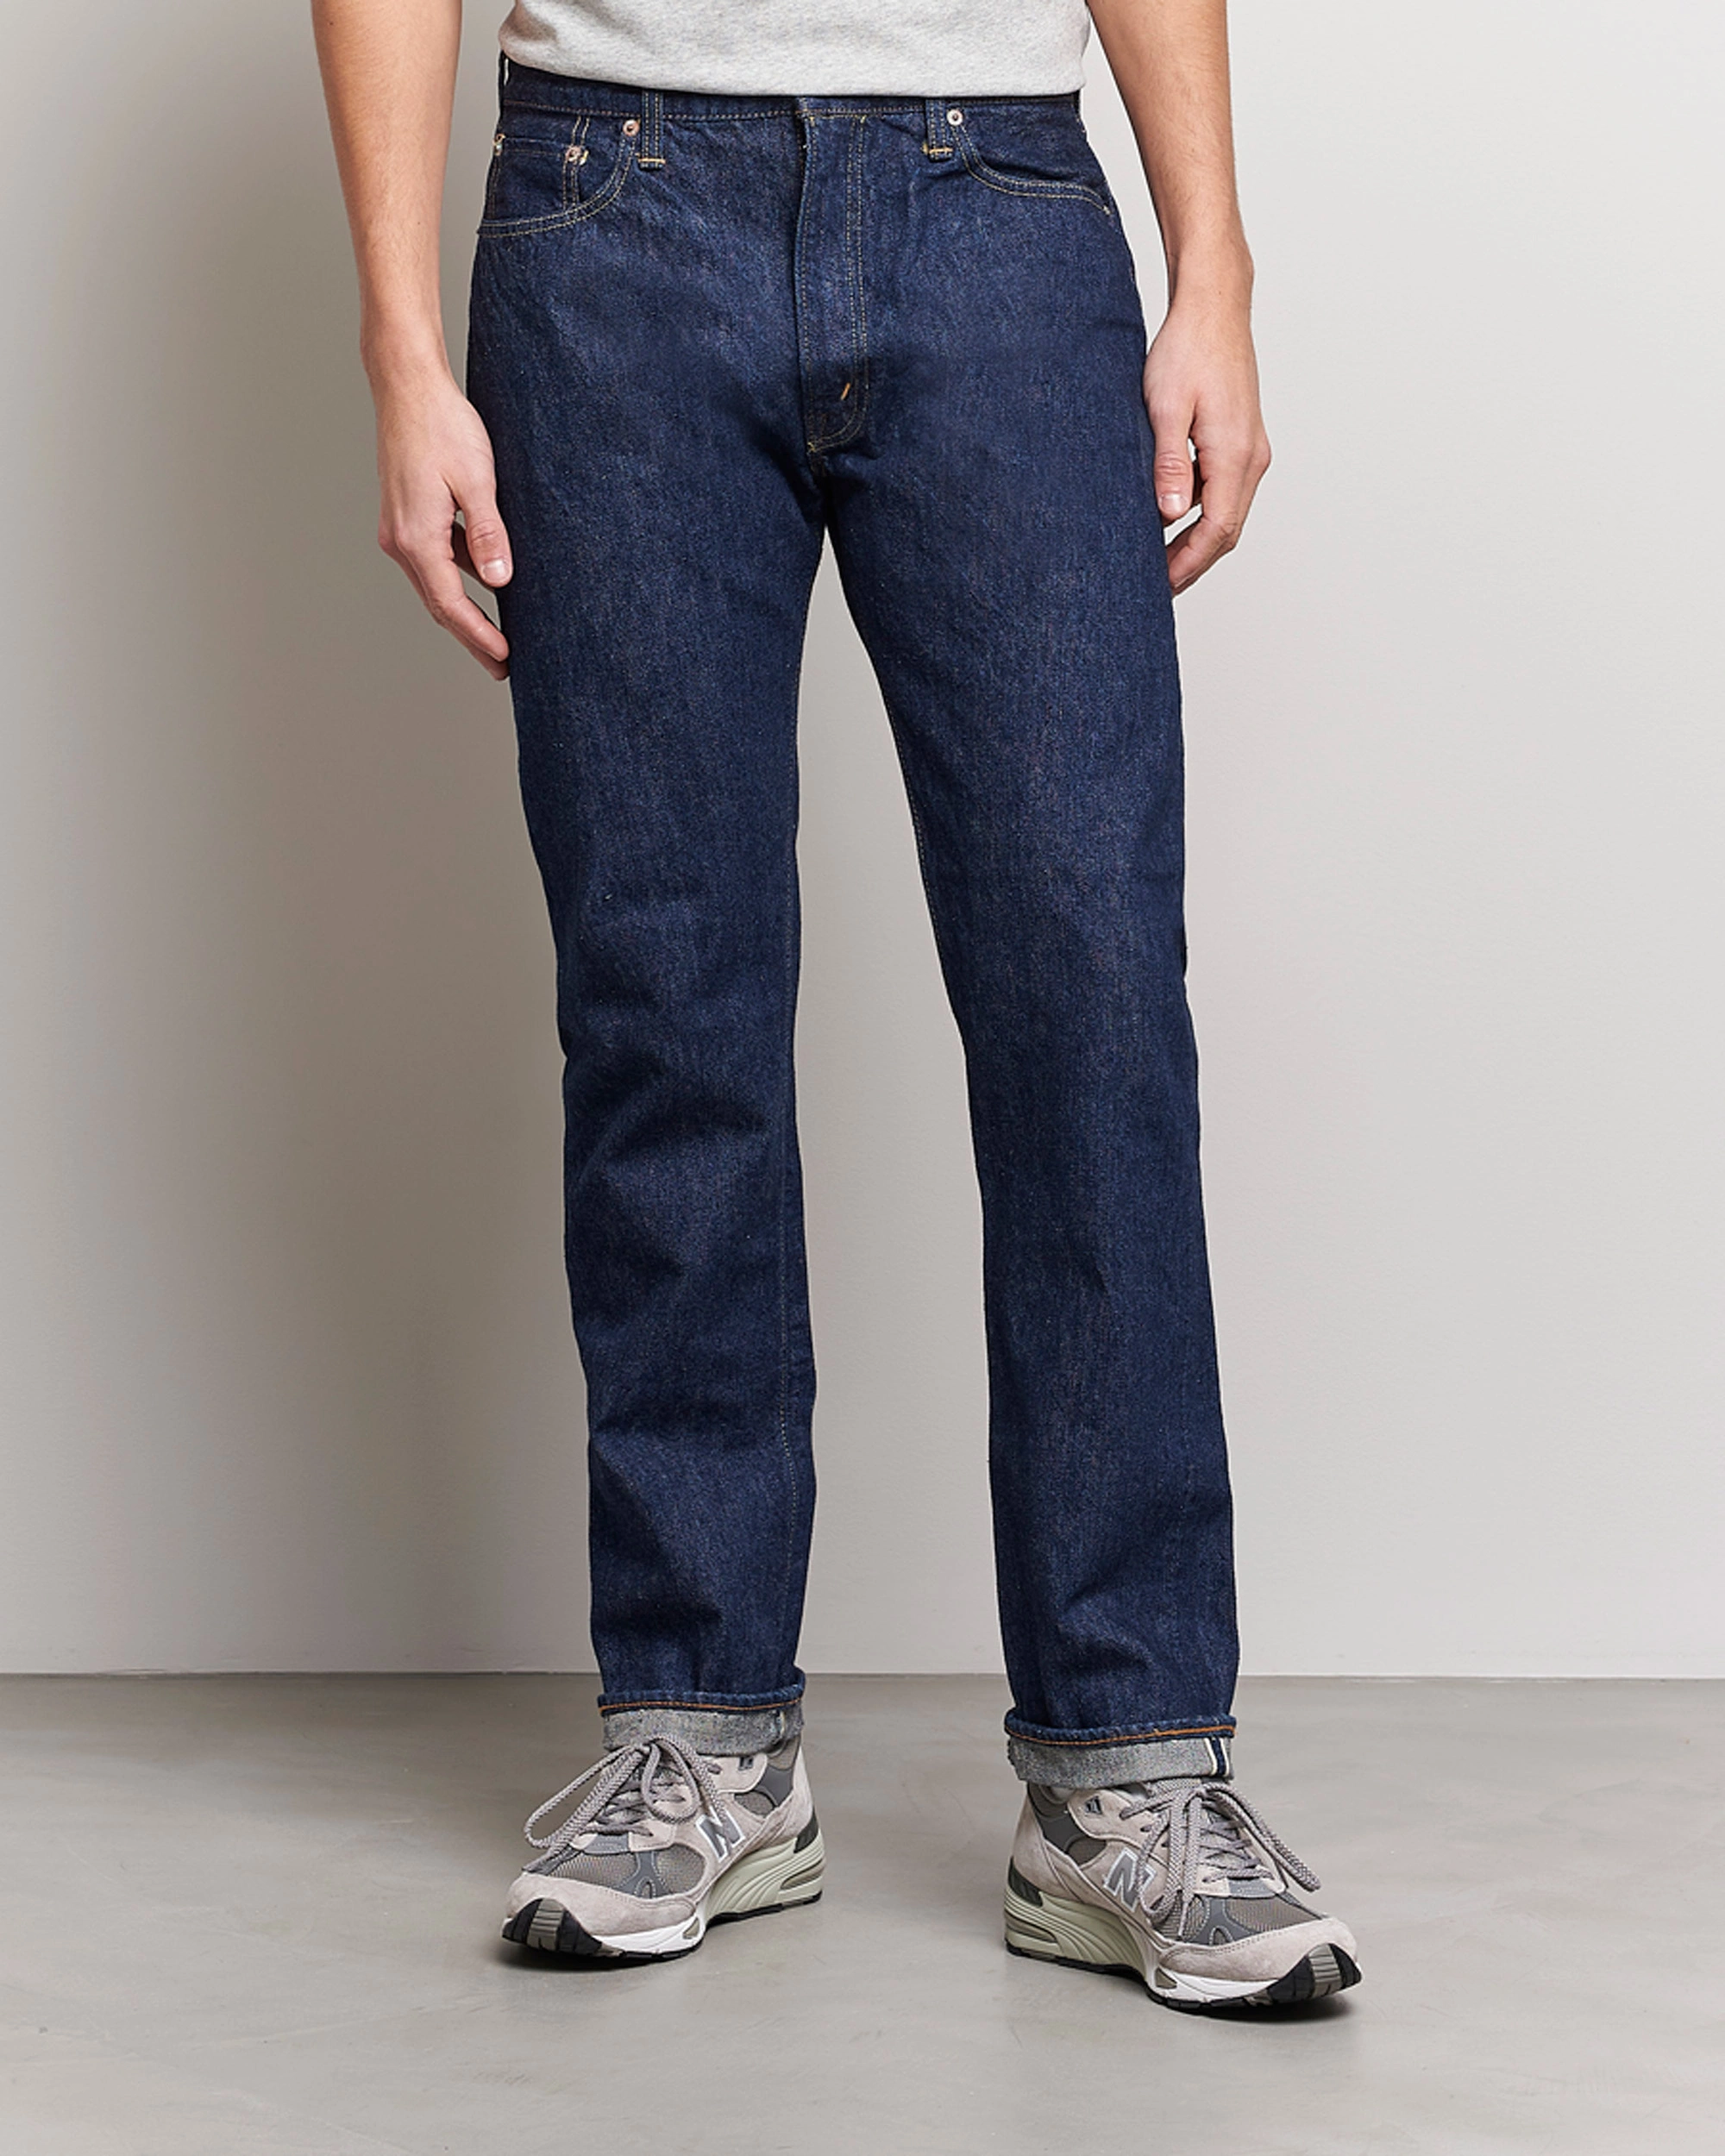 Mies |  | orSlow | Slim Fit 107 Selvedge Jeans One Wash